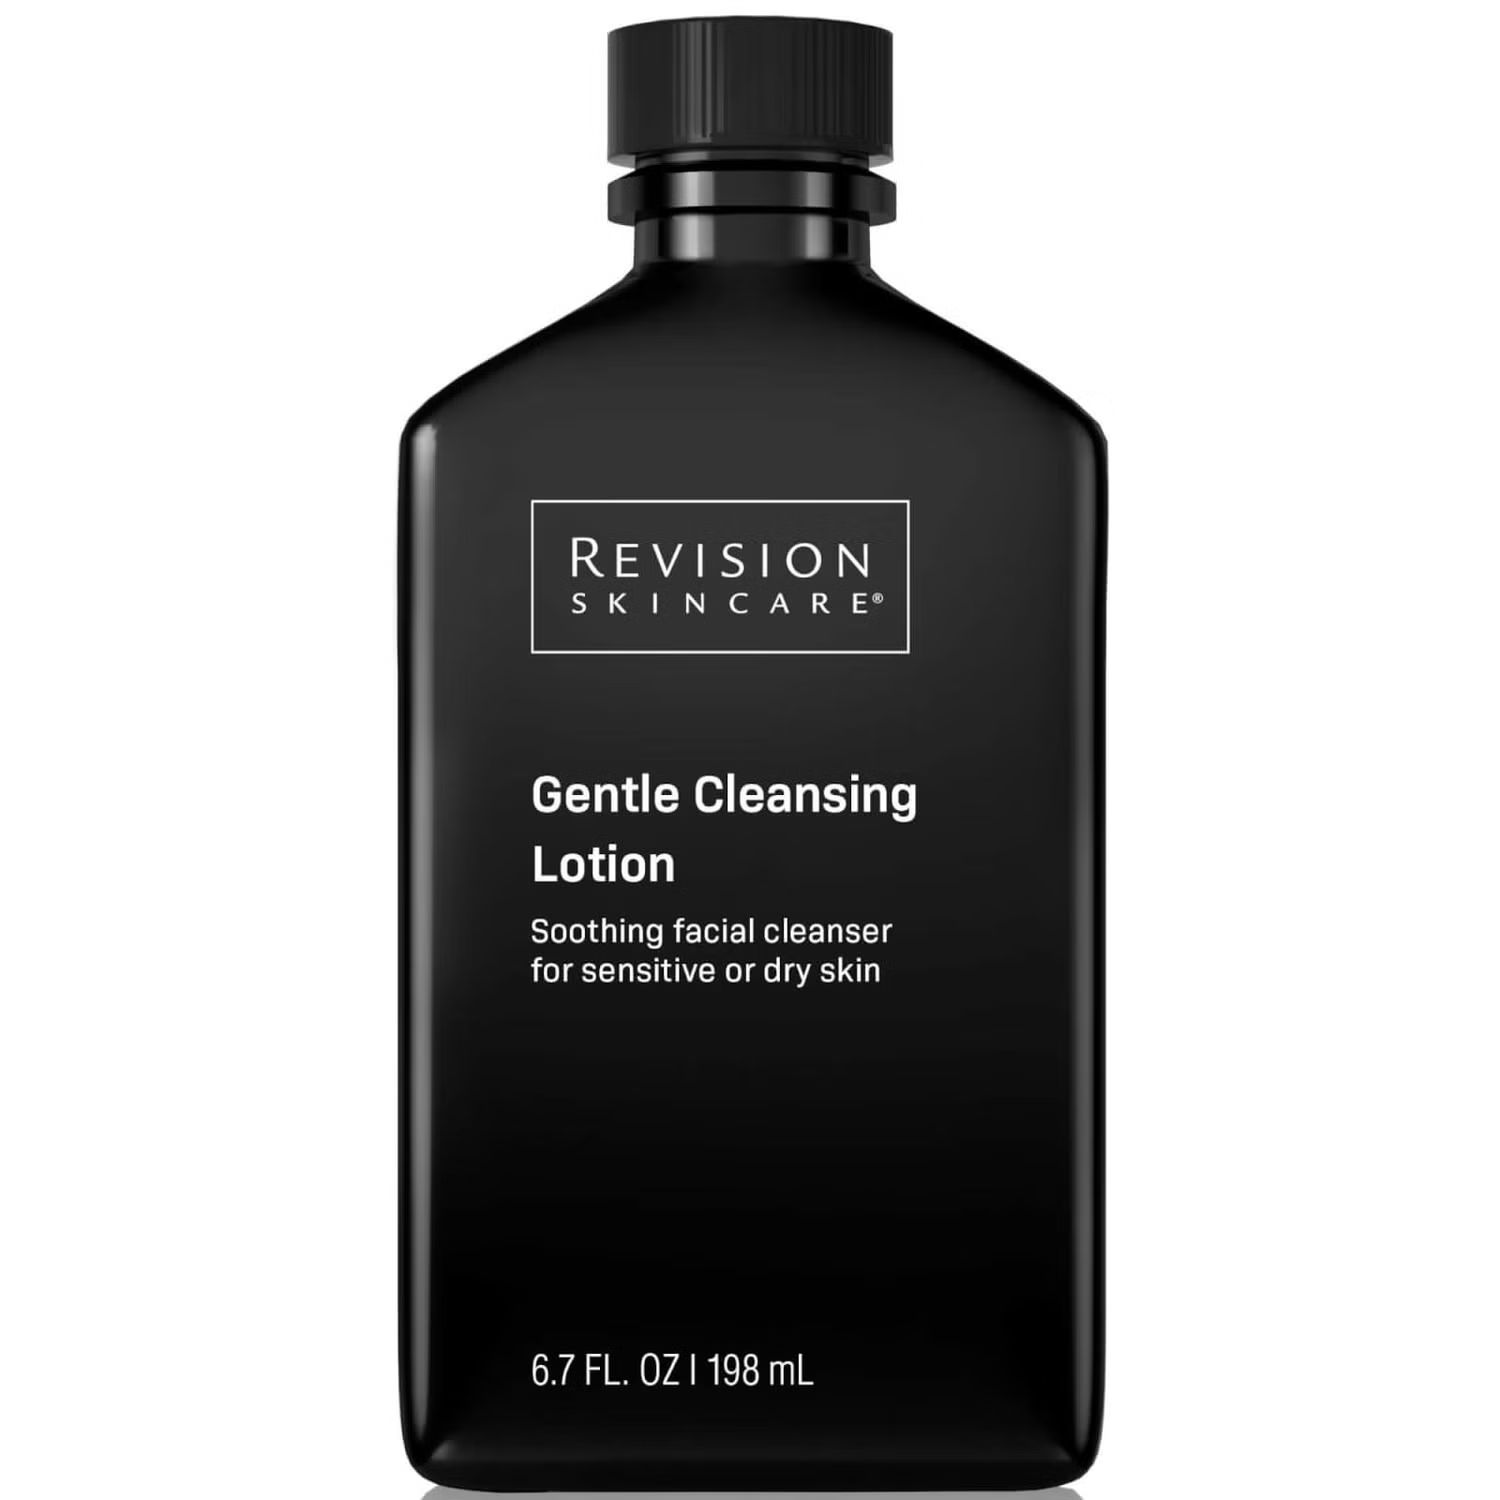 Revision Skincare Gentle Cleansing Lotion 6.7 fl. oz | Dermstore (US)